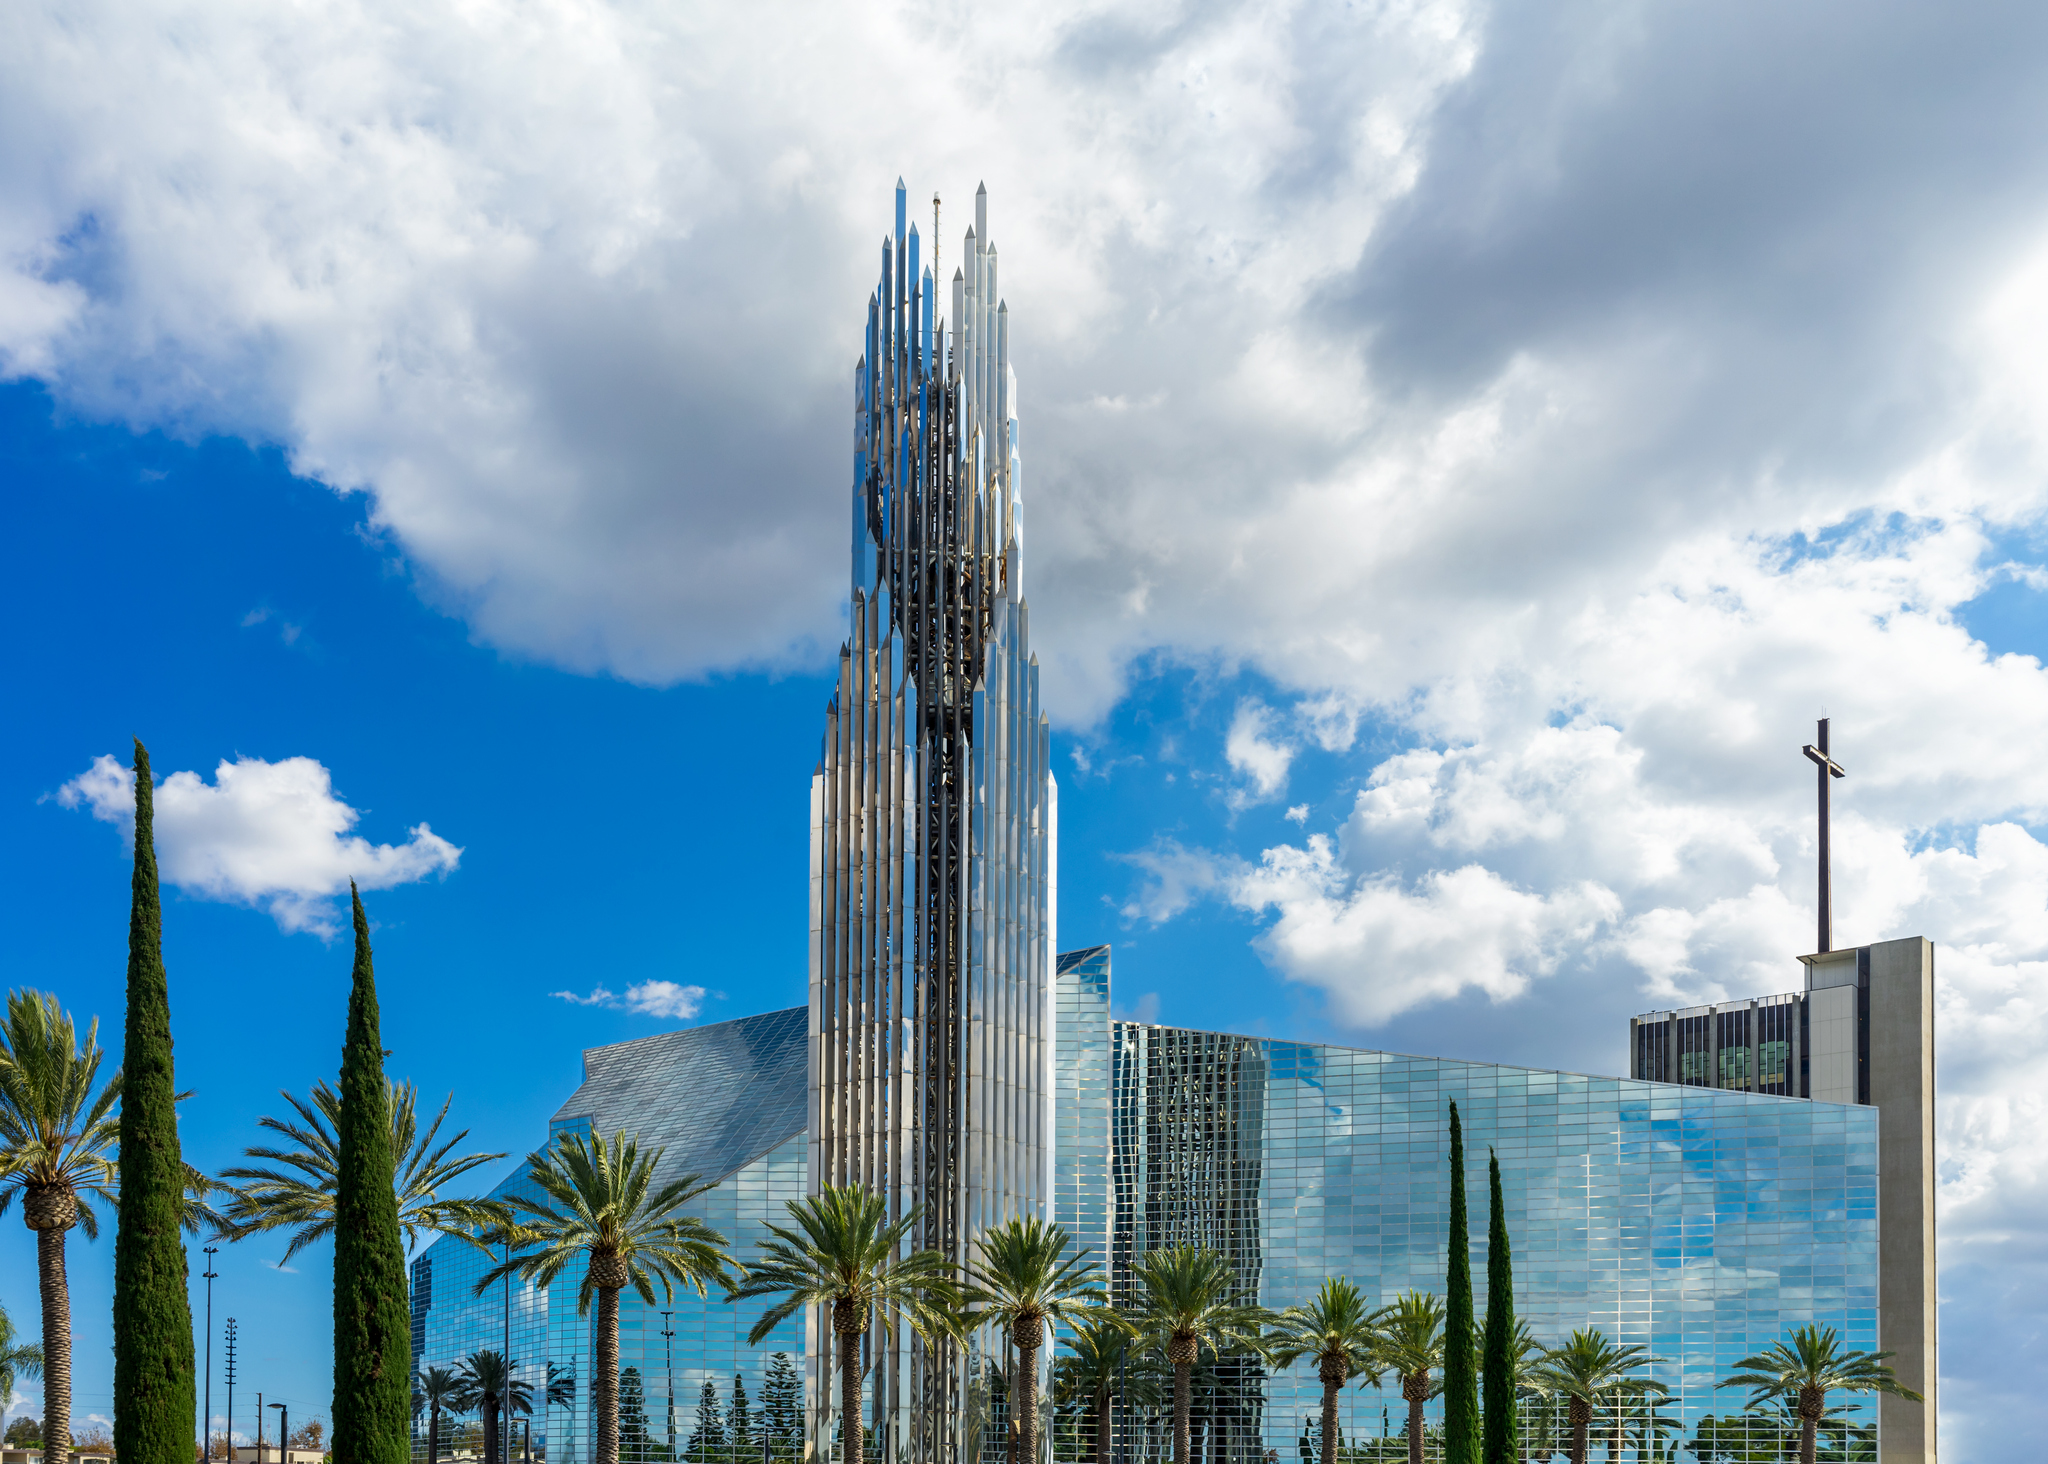 Explore the Crystal Cathedral in Garden Grove